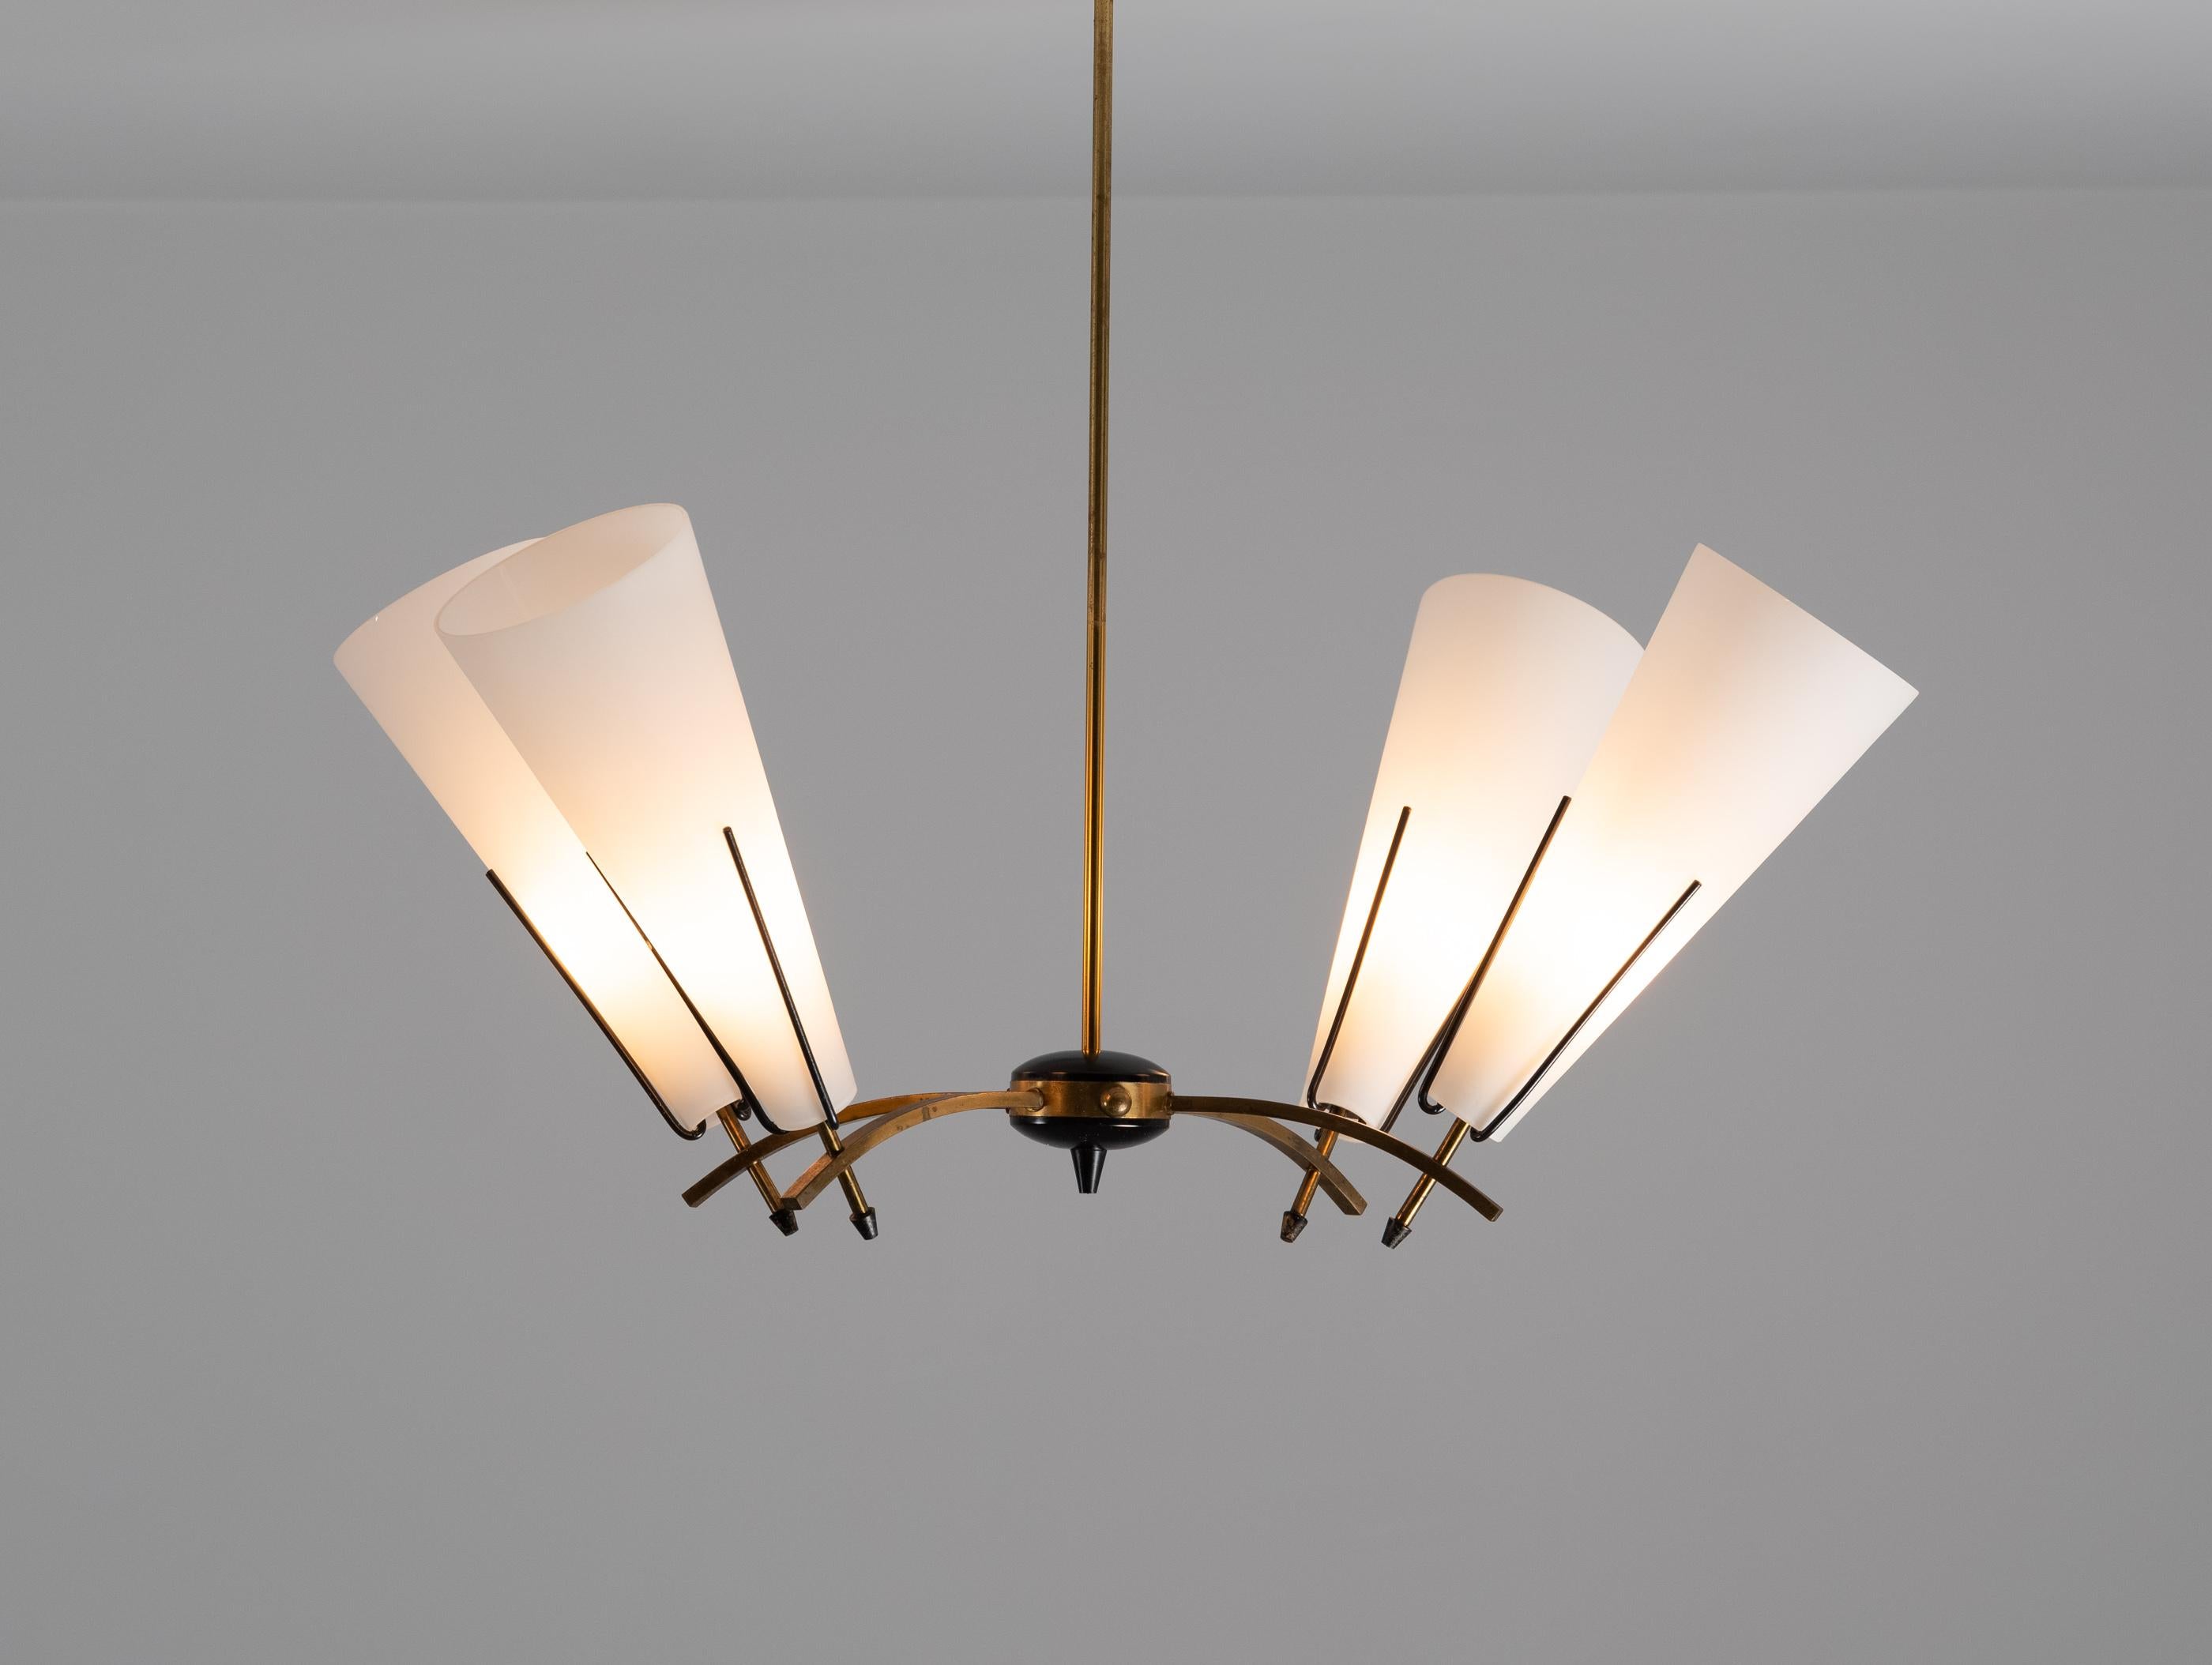 Stilnovo 1950s chandelier in brass and 4 conical Opals, vintage Italian design 

A rare midcentury lighting object that we attribute to the production of Stilnovo in the 1950s. Clear lines and geometric shapes distinguish this elegant 50s lighting.